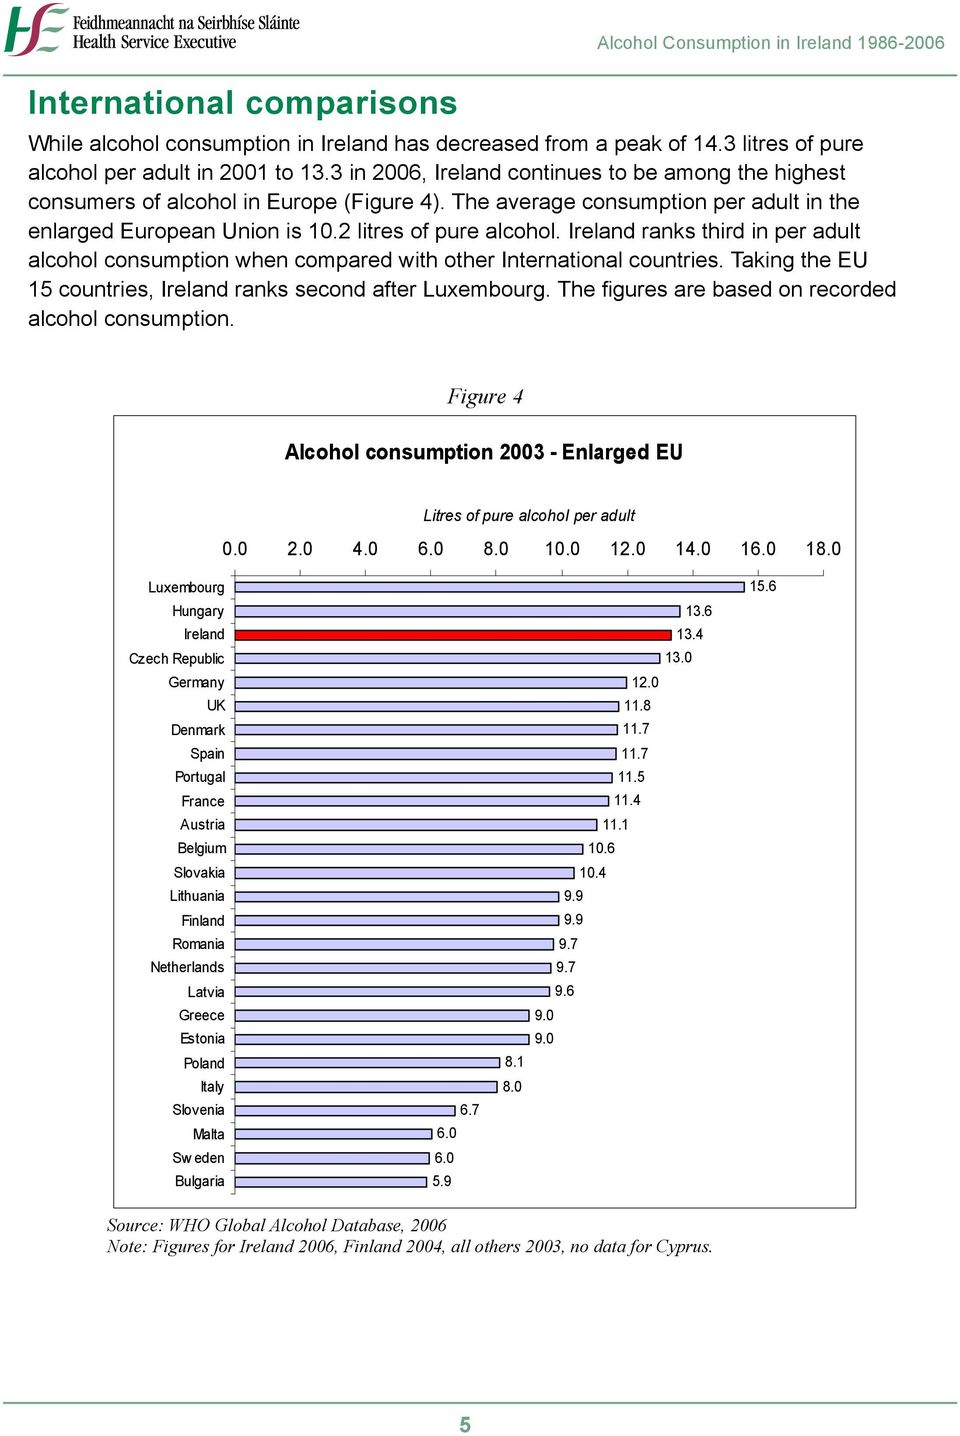 Ireland ranks third in per adult alcohol consumption when compared with other International countries. Taking the EU 15 countries, Ireland ranks second after Luxembourg.